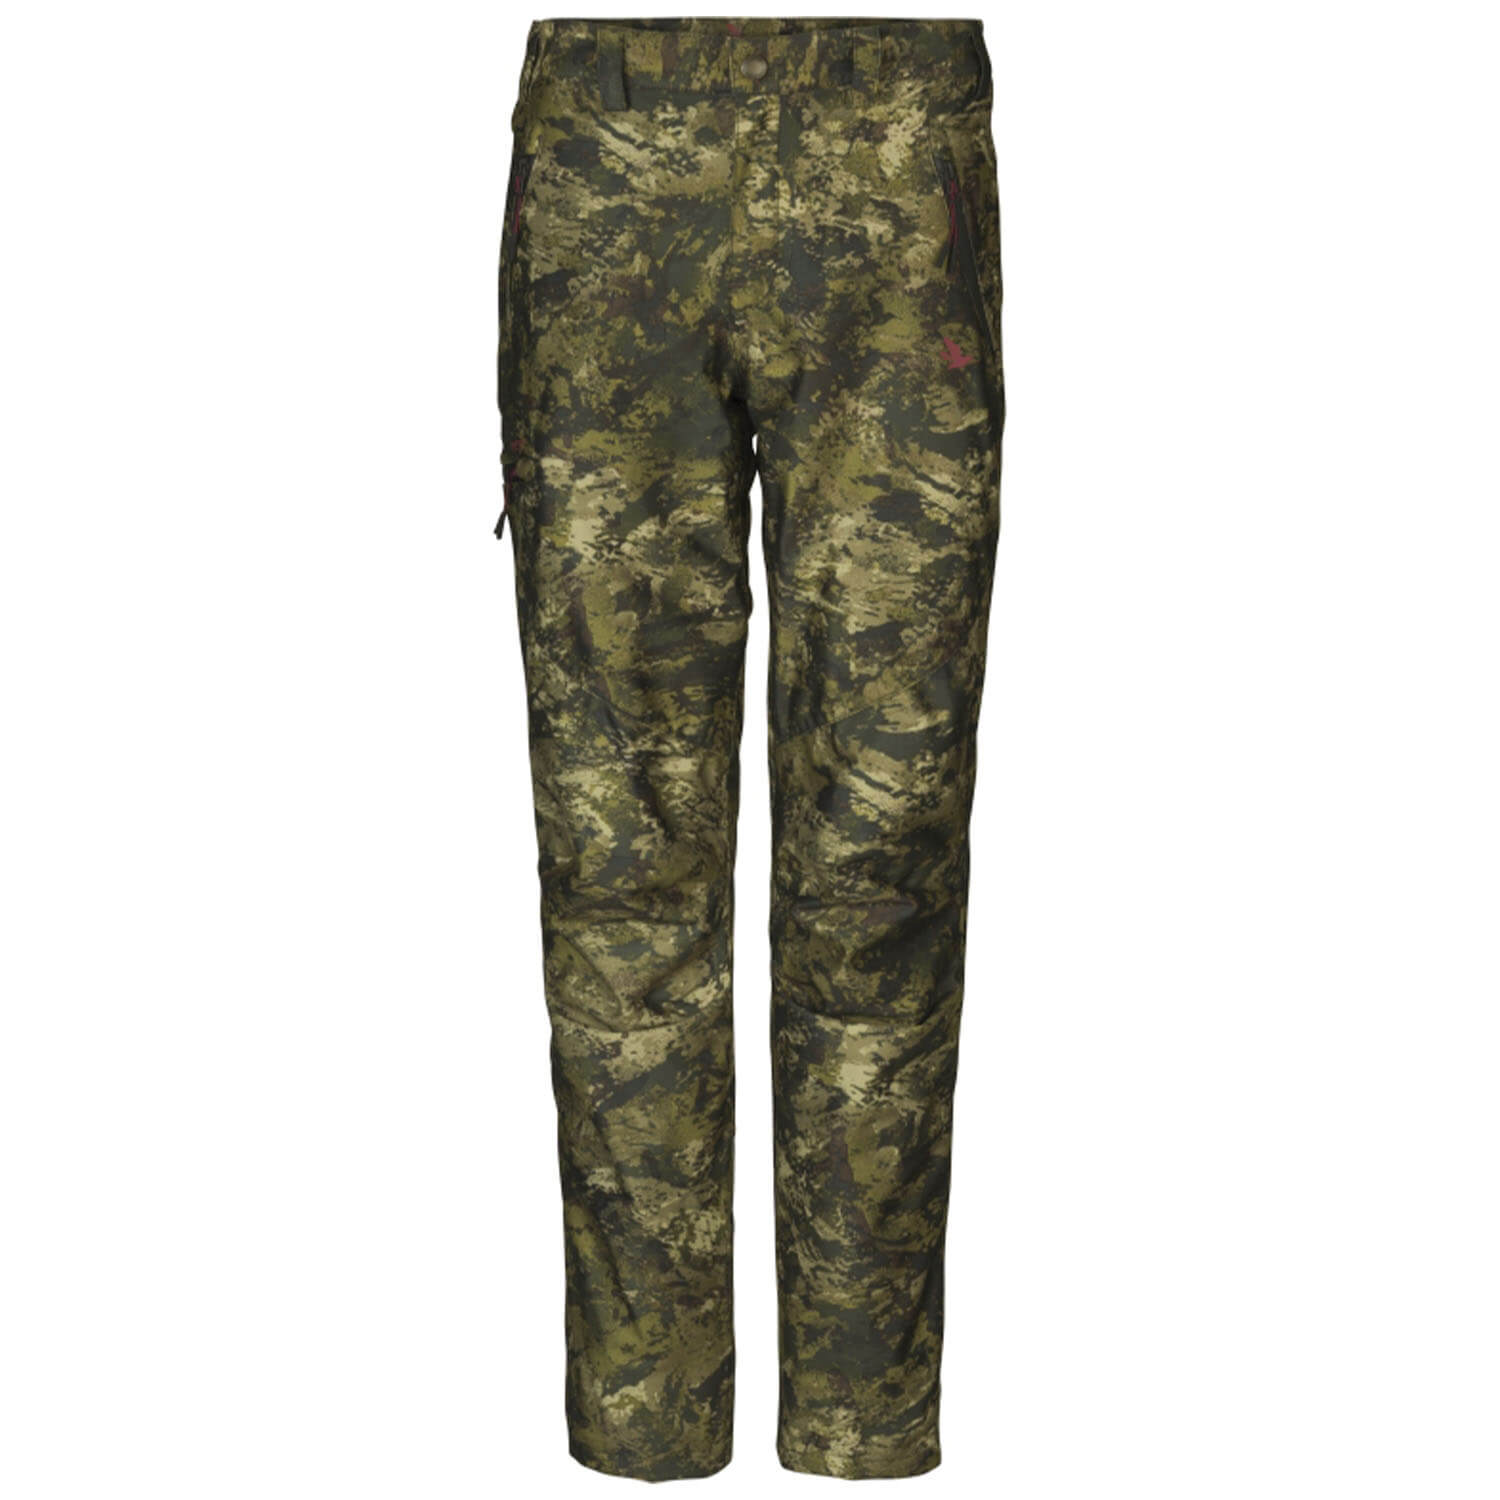 Seeland ladys hunting pants avail (InVis) - Camouflage Clothing